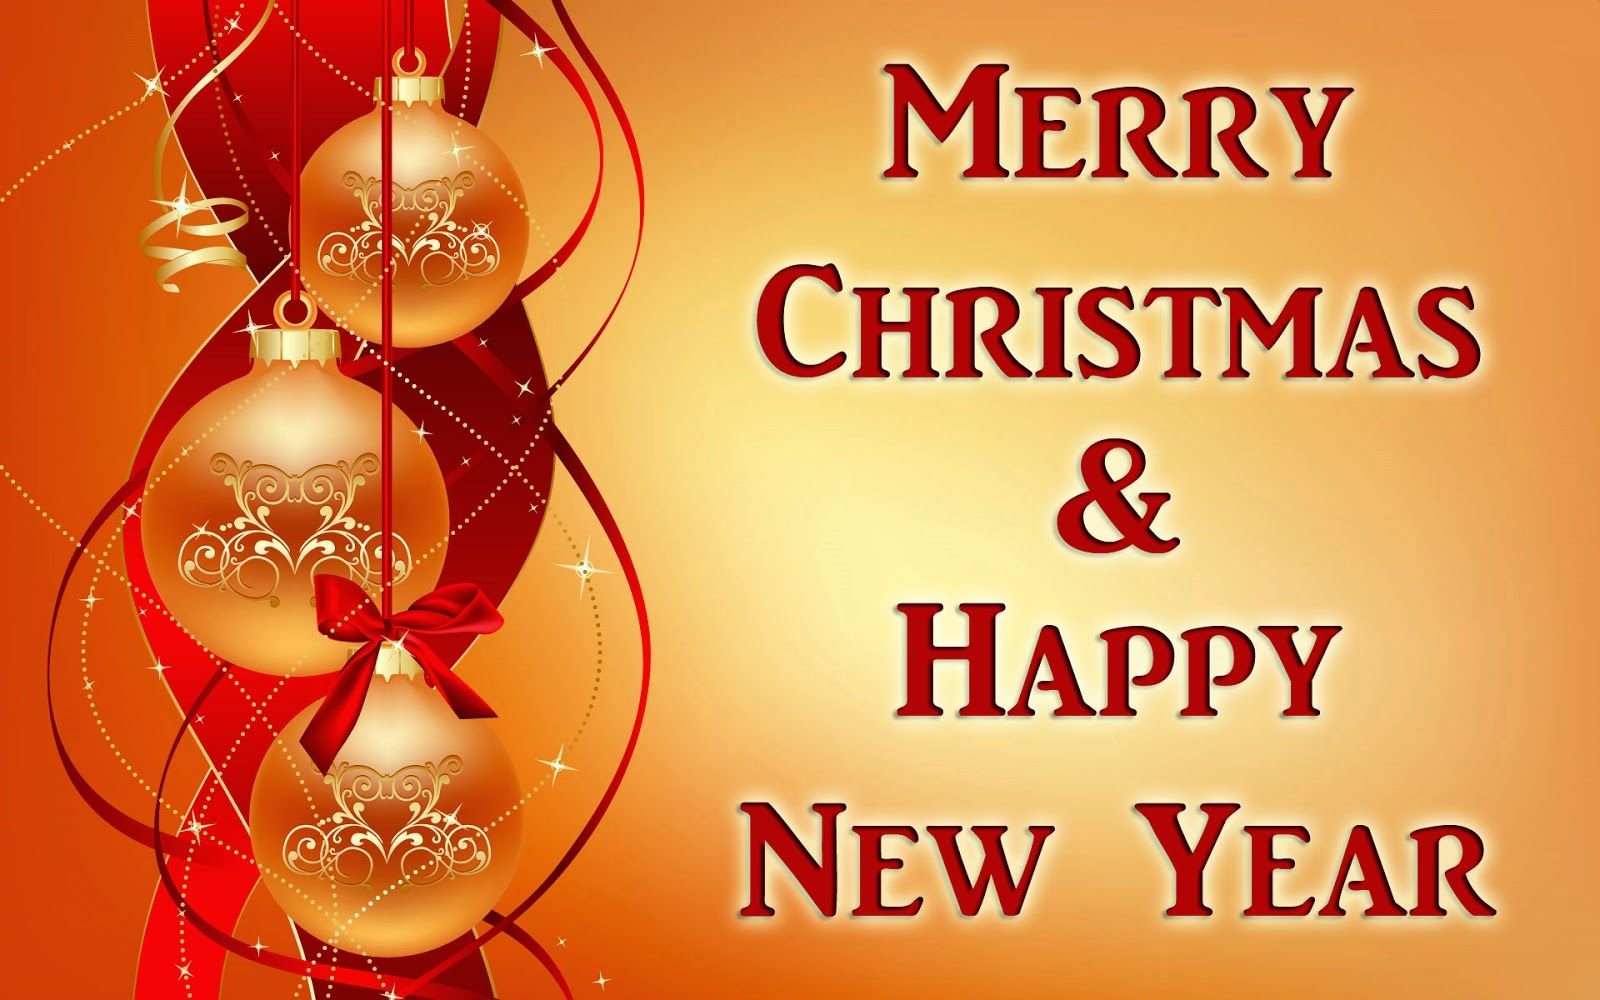 Happy christmas be. Merry Christmas. Merry Christmas and New year. Happy New year and Christmas. Christmas and New year Wishes.